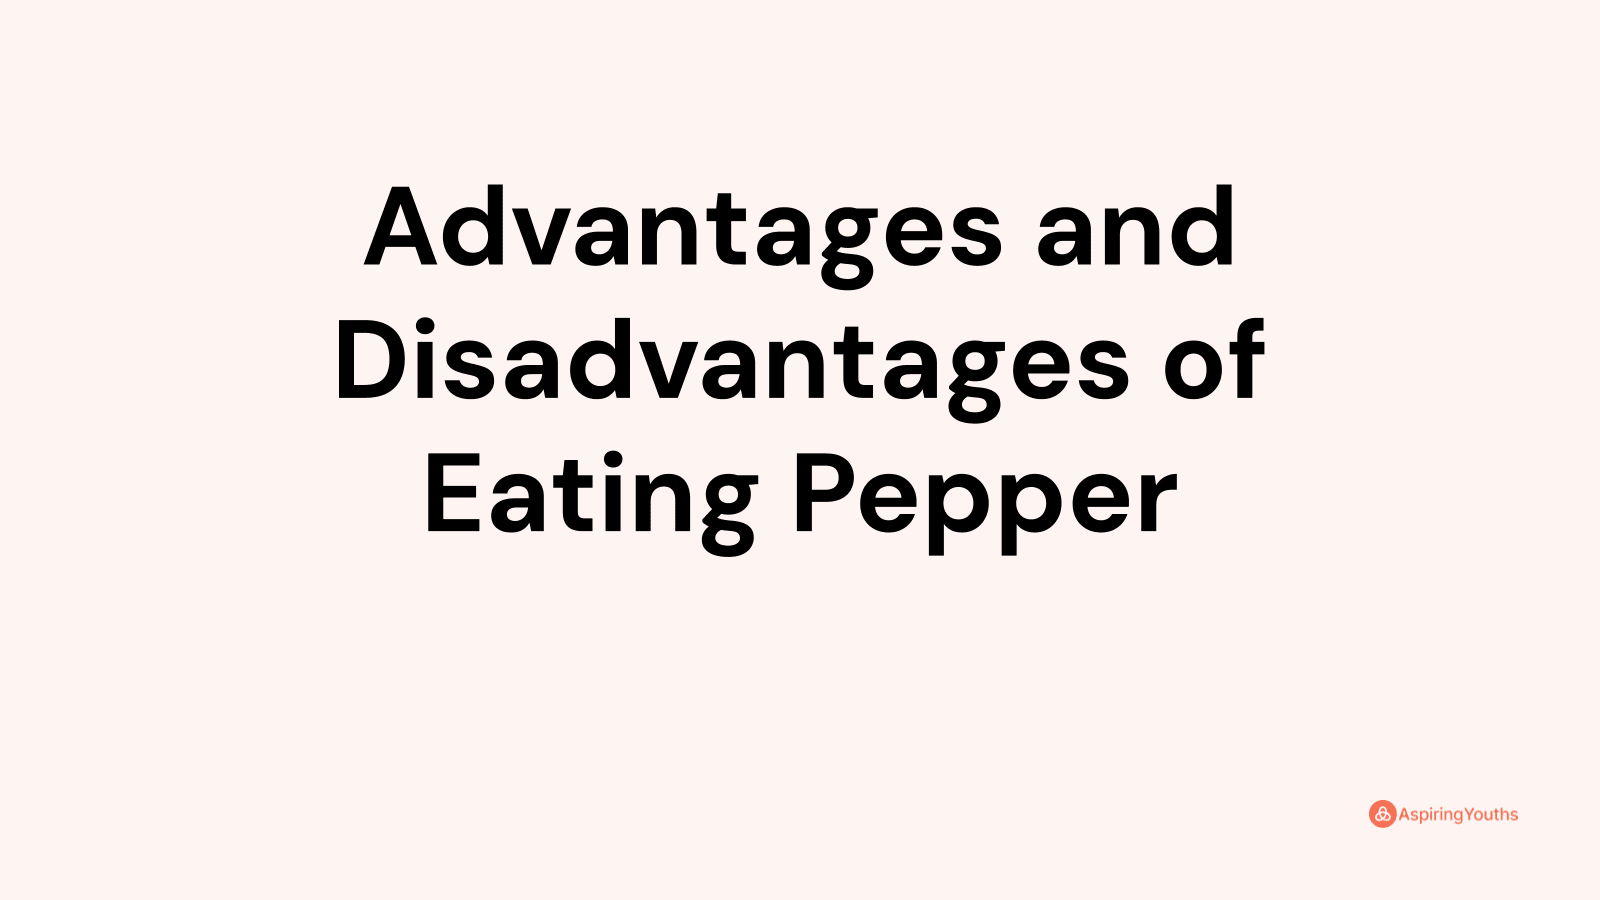 Advantages and disadvantages of Eating Pepper